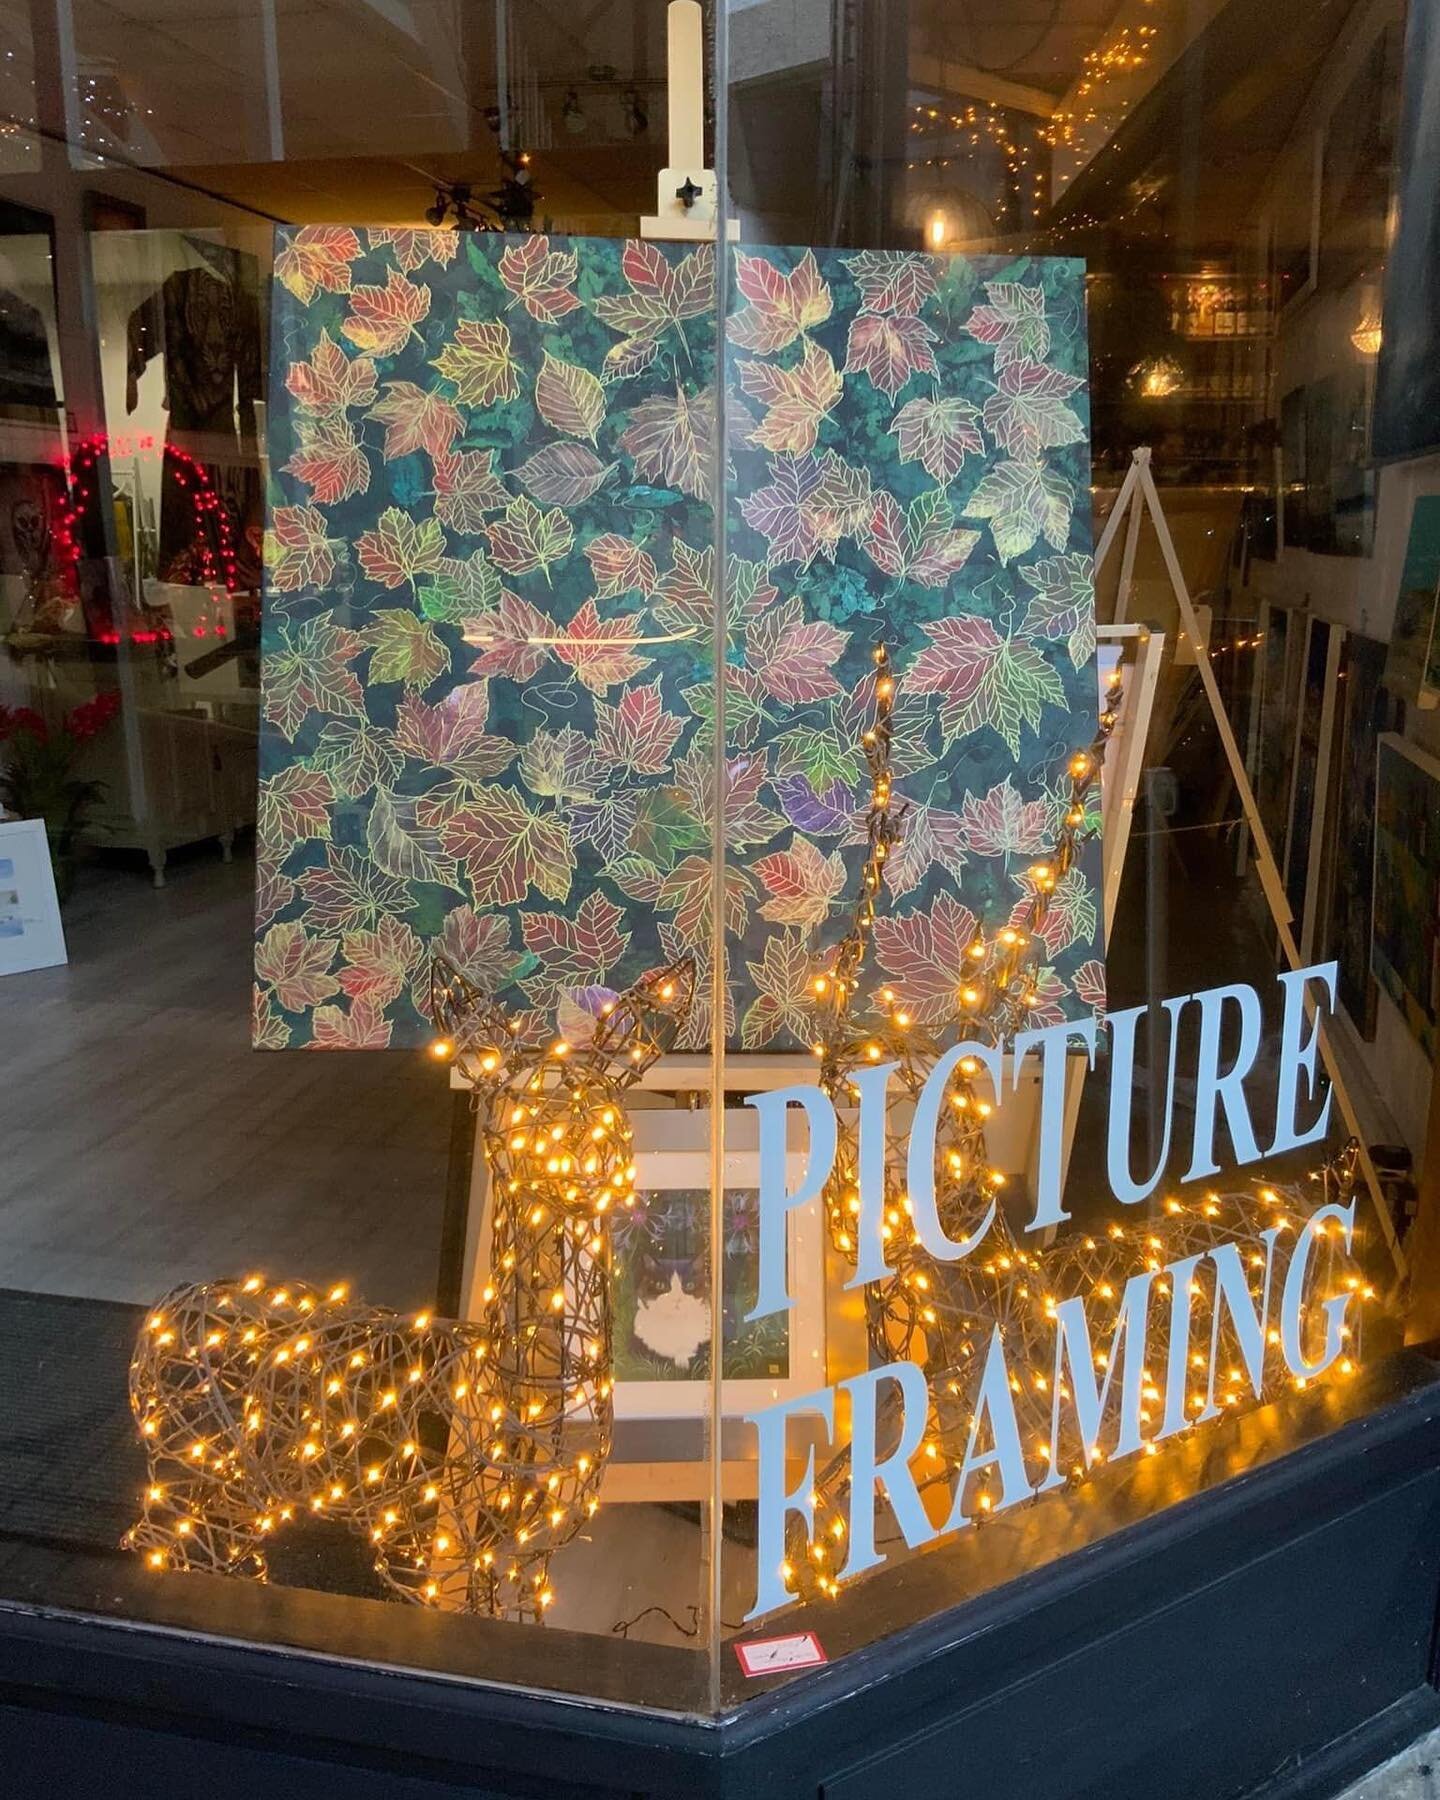 The fallen leaf painting on canvas looks stunning in the window of The Original Art Shop Truro 🙌🎨 For Sale and ready for Christmas . #art #artistsoninstagram #artwork #artgallery #artforsale #canvas #style #homesandgardensmagazine #vouge #interiord